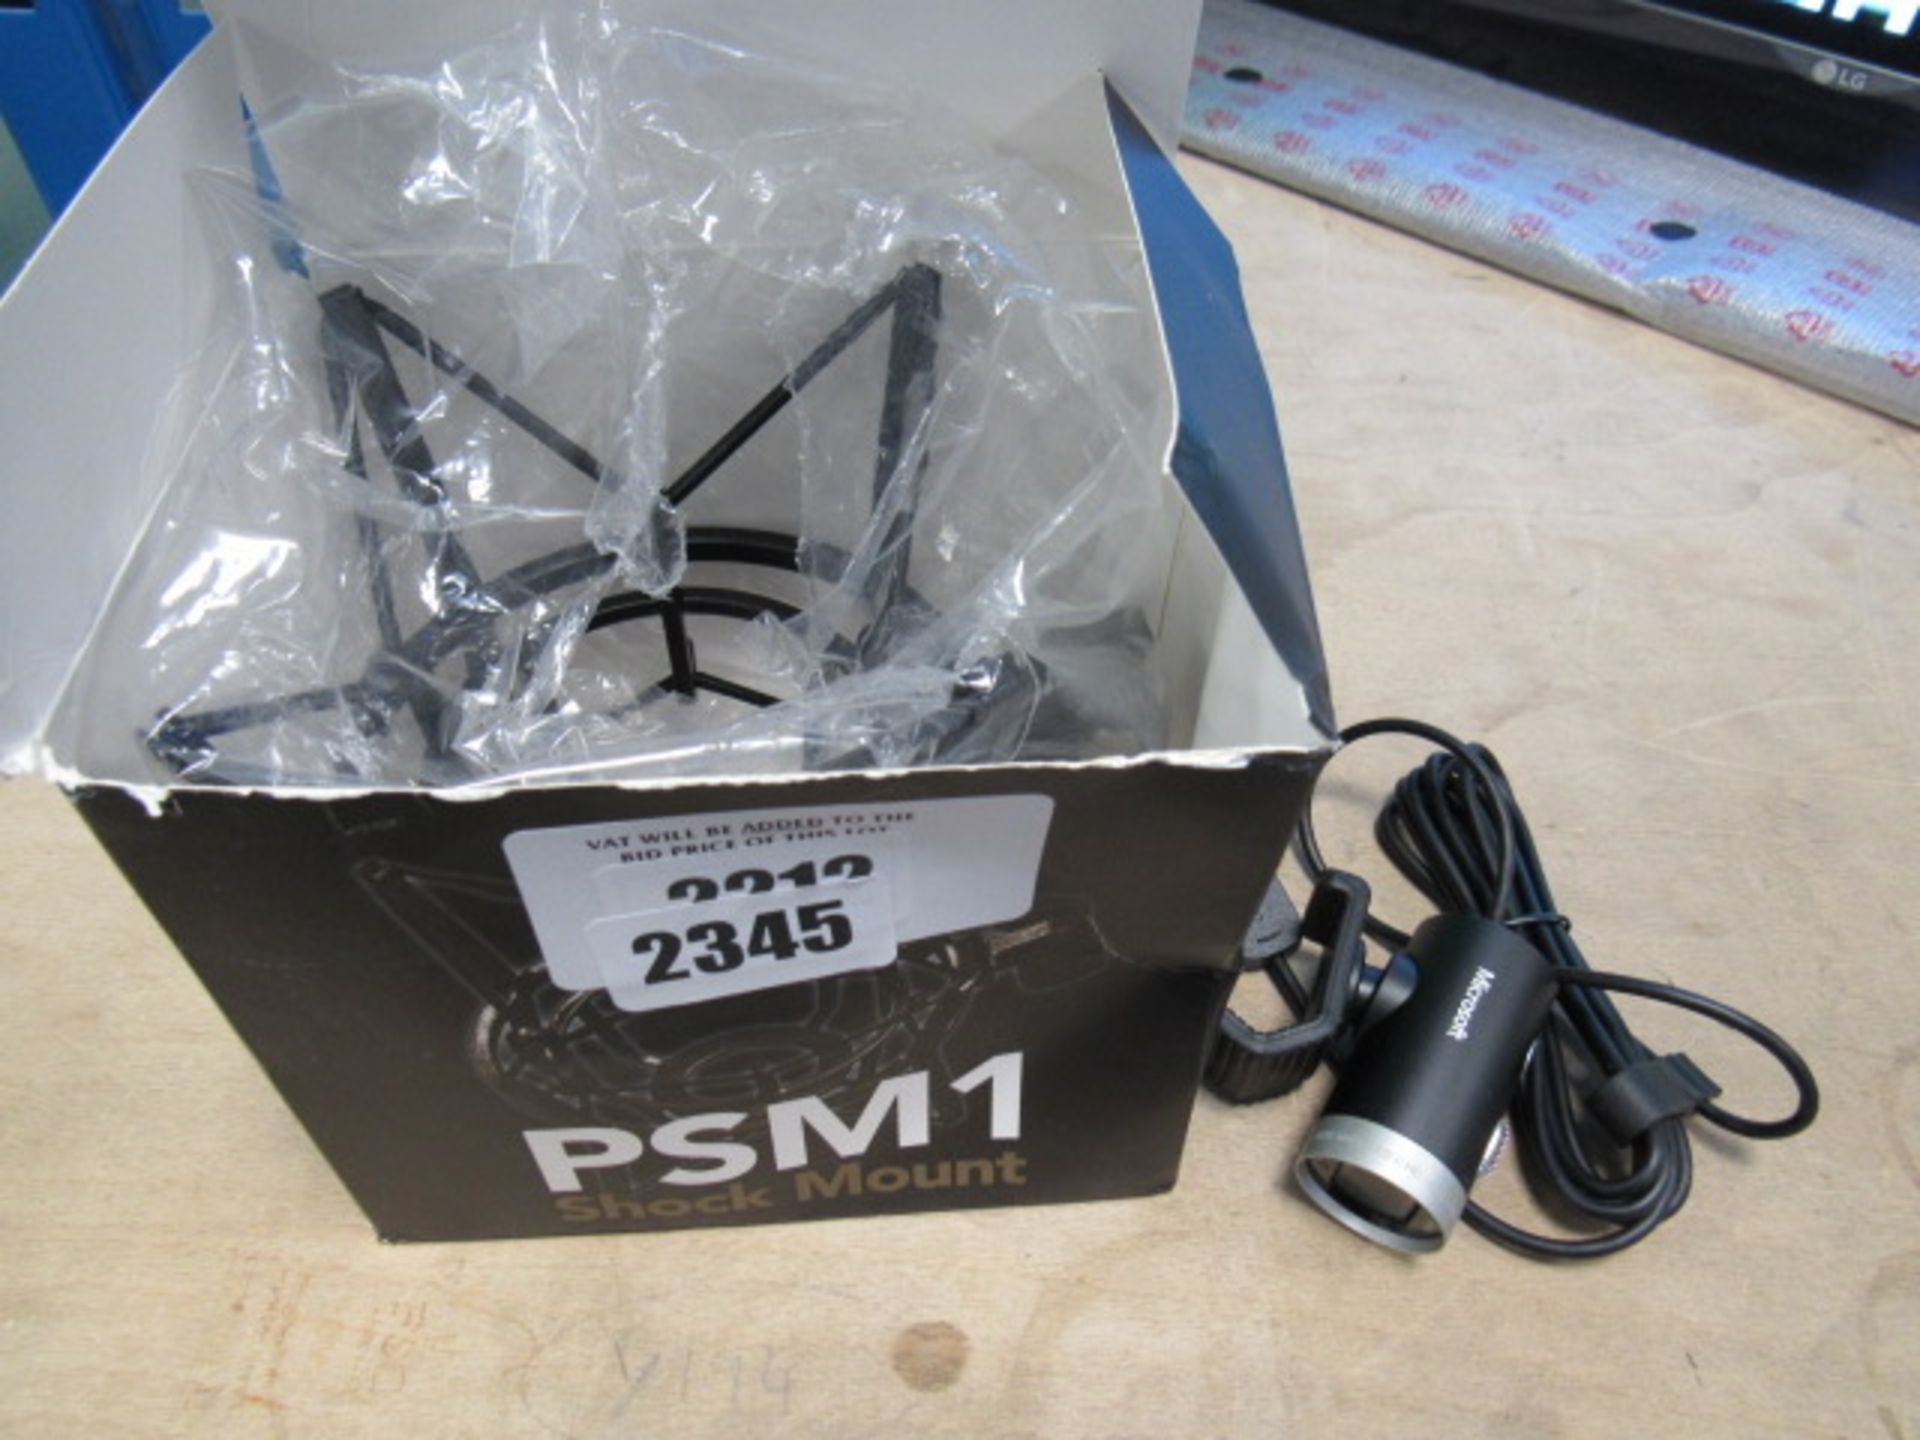 2212 Rode model PSM1 shock mount for microphone and Microsoft HD USB web cam